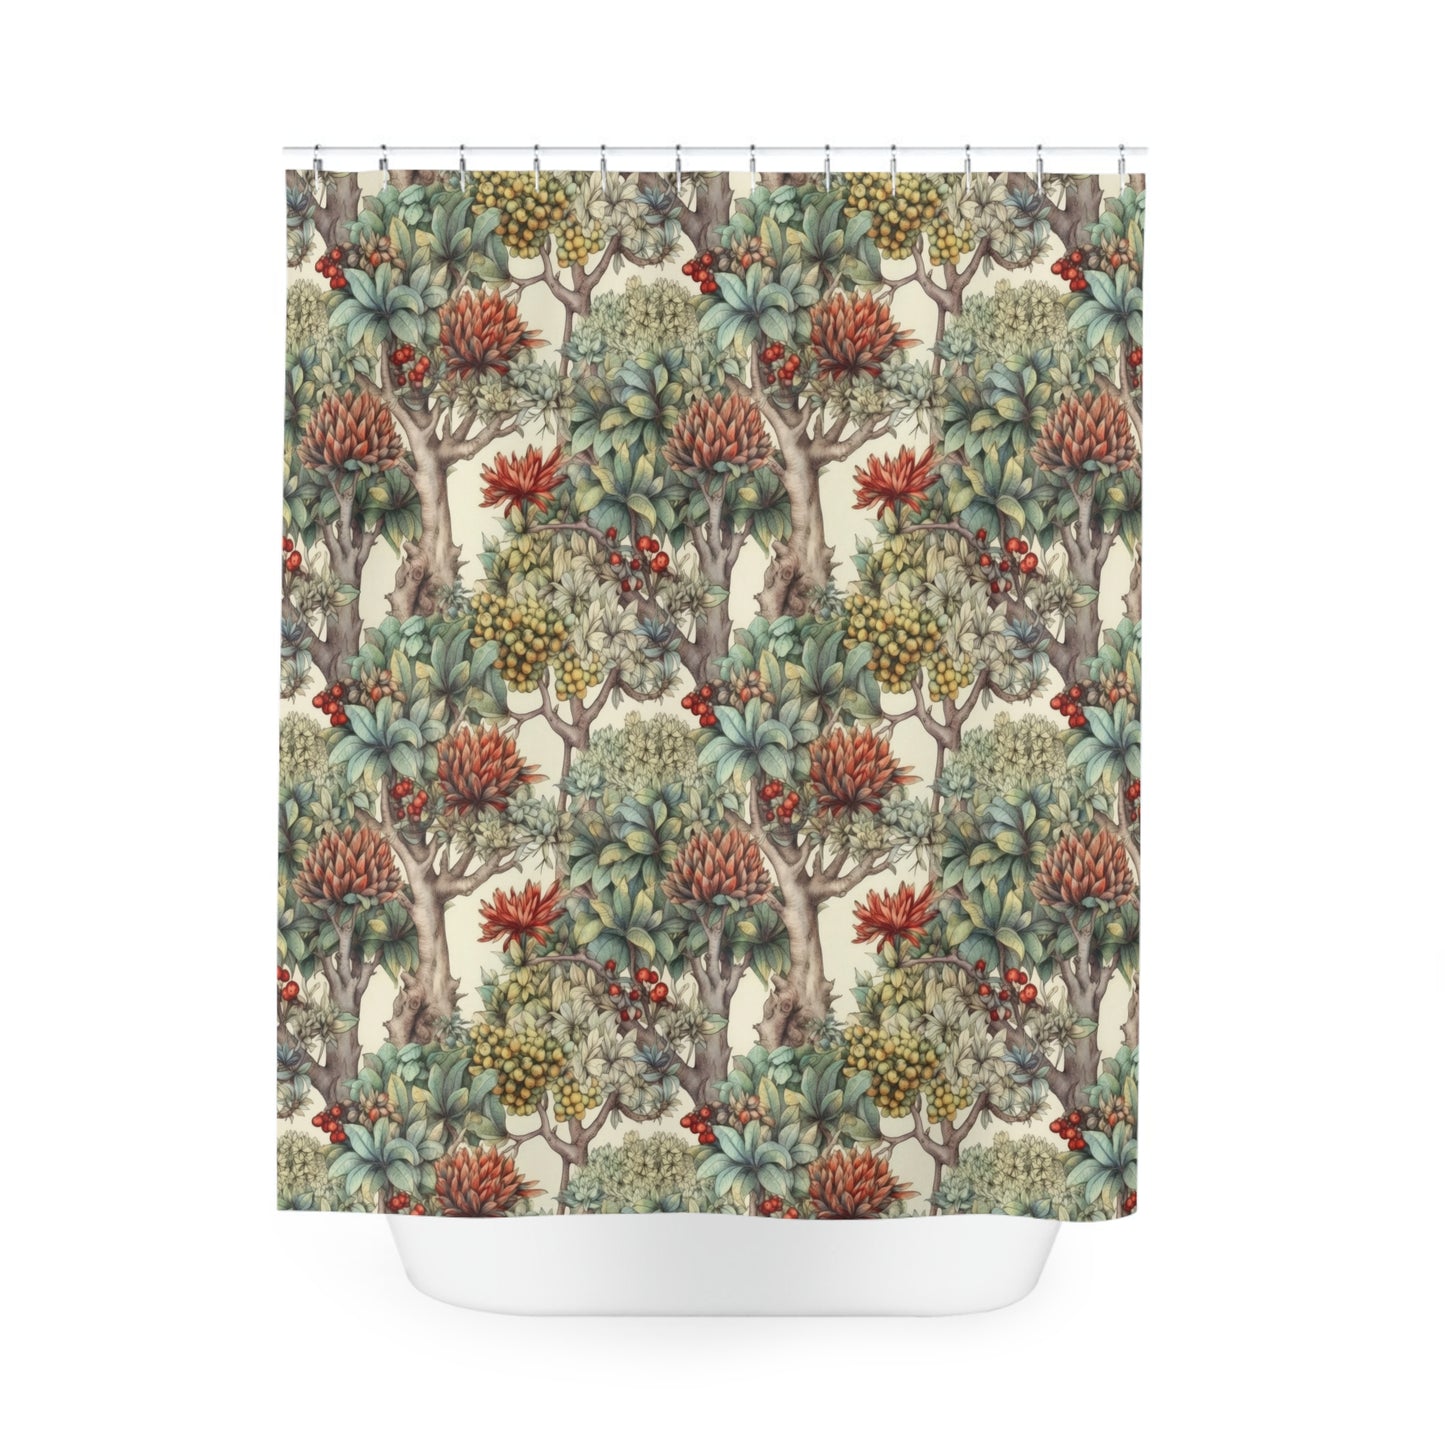 Mix Fruit Trees Shower Curtain